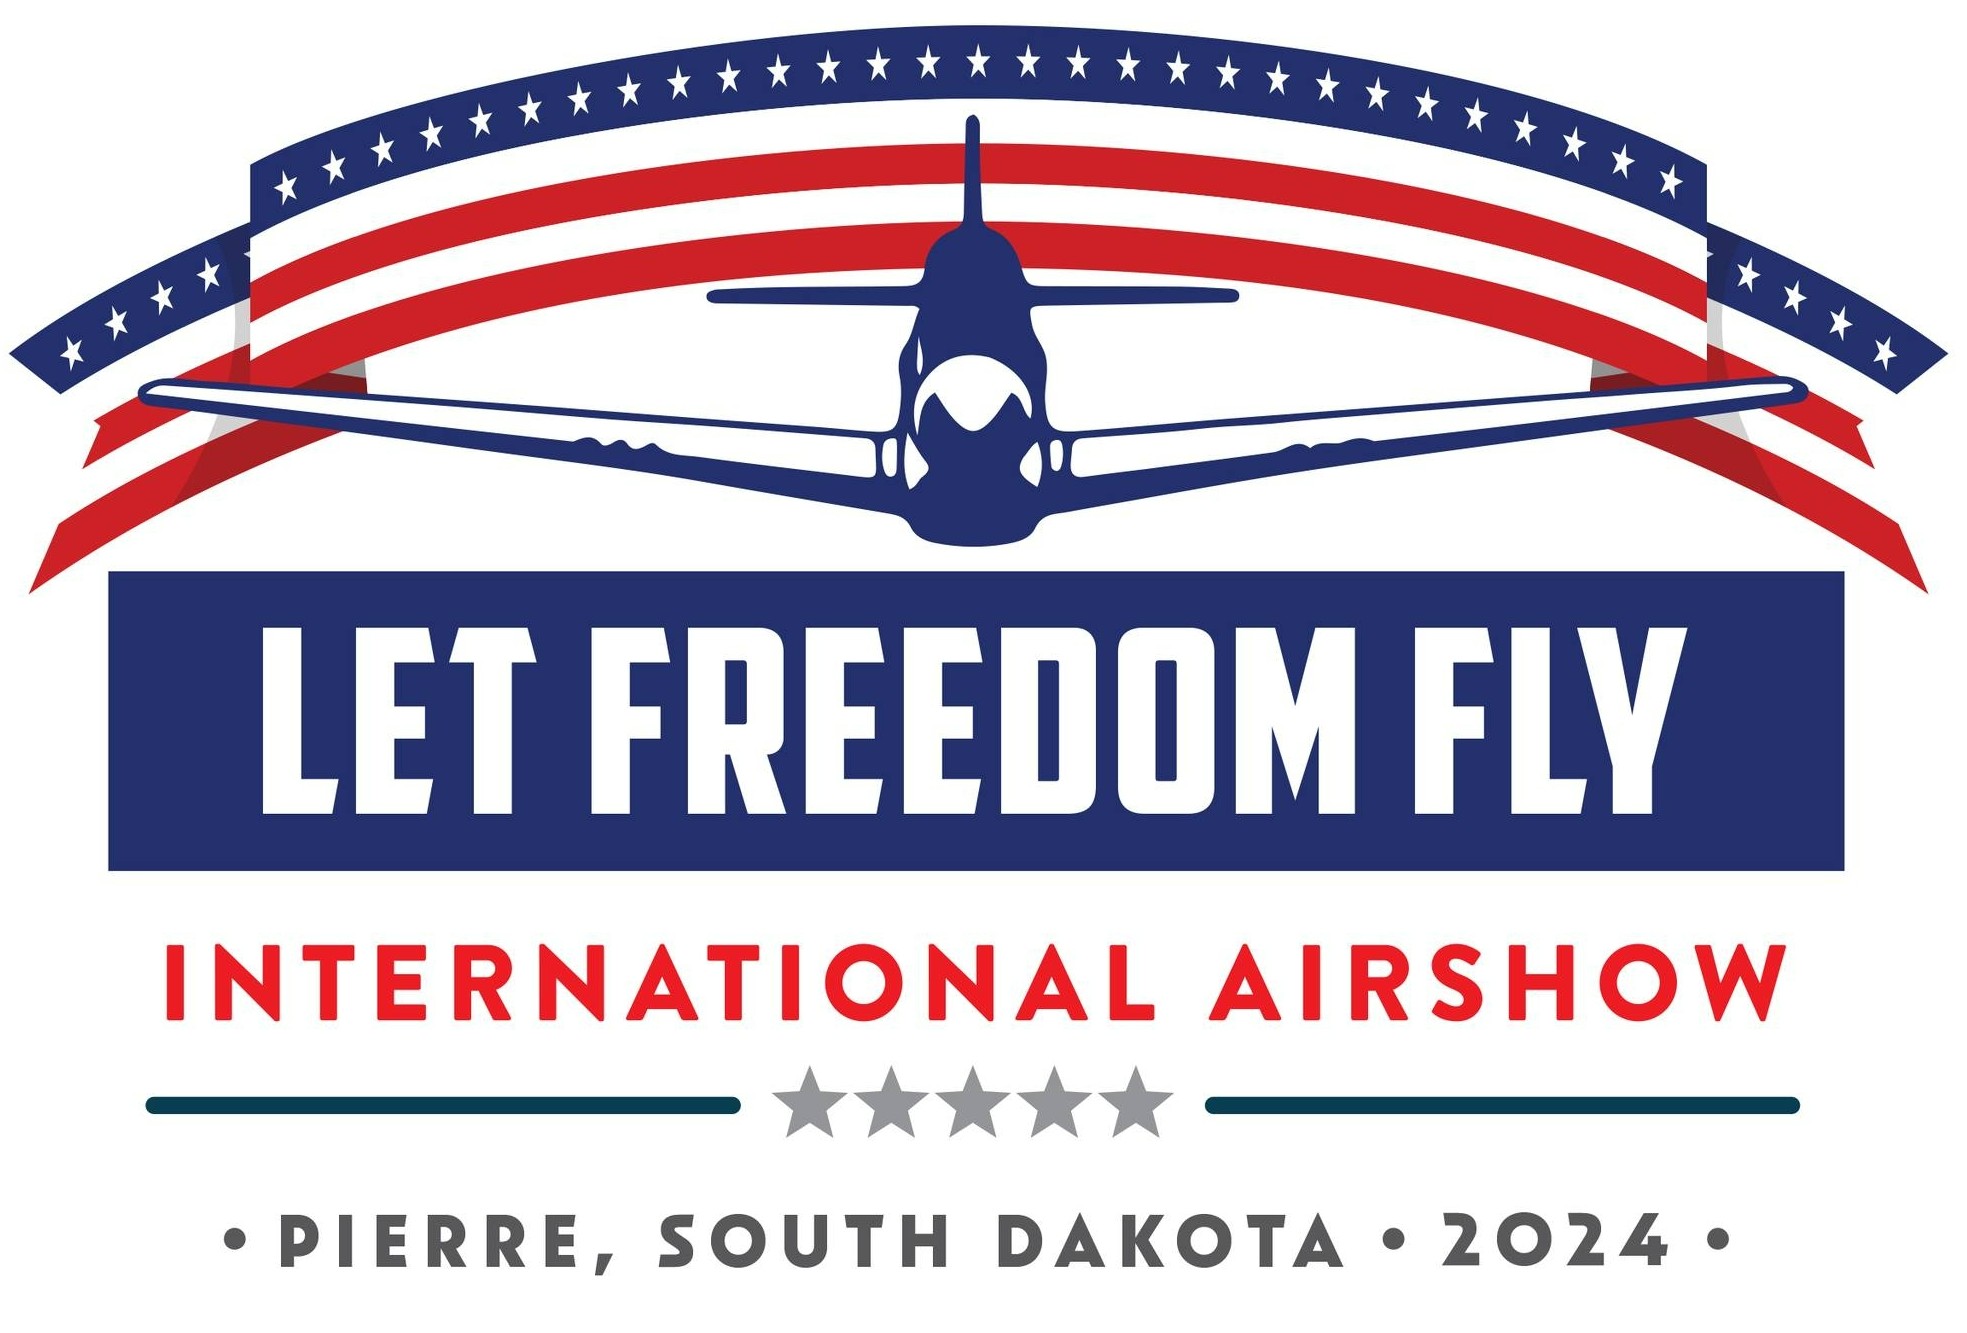 Use Of Drones In Pierre, Fort Pierre Highly Discouraged Before, During Let Freedom Fly Airshow